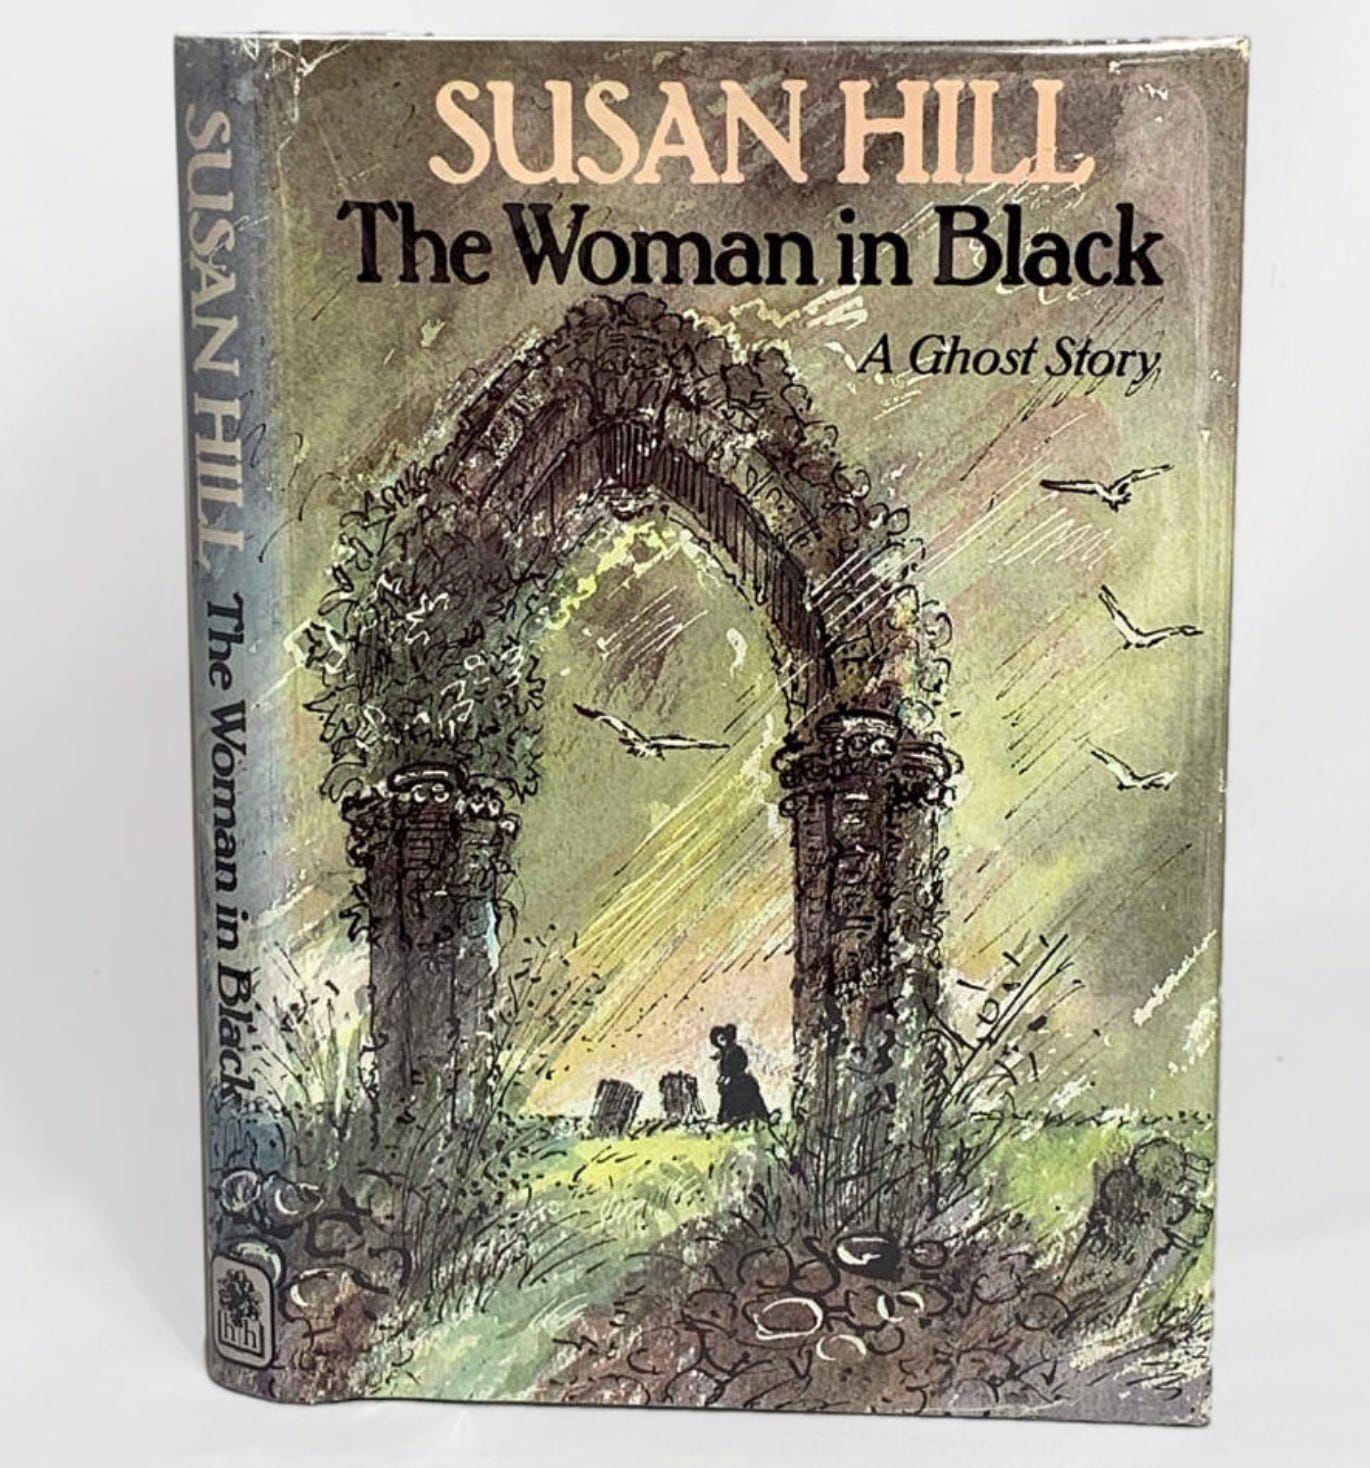 I'm the King of the Castle by Susan Hill - 1970